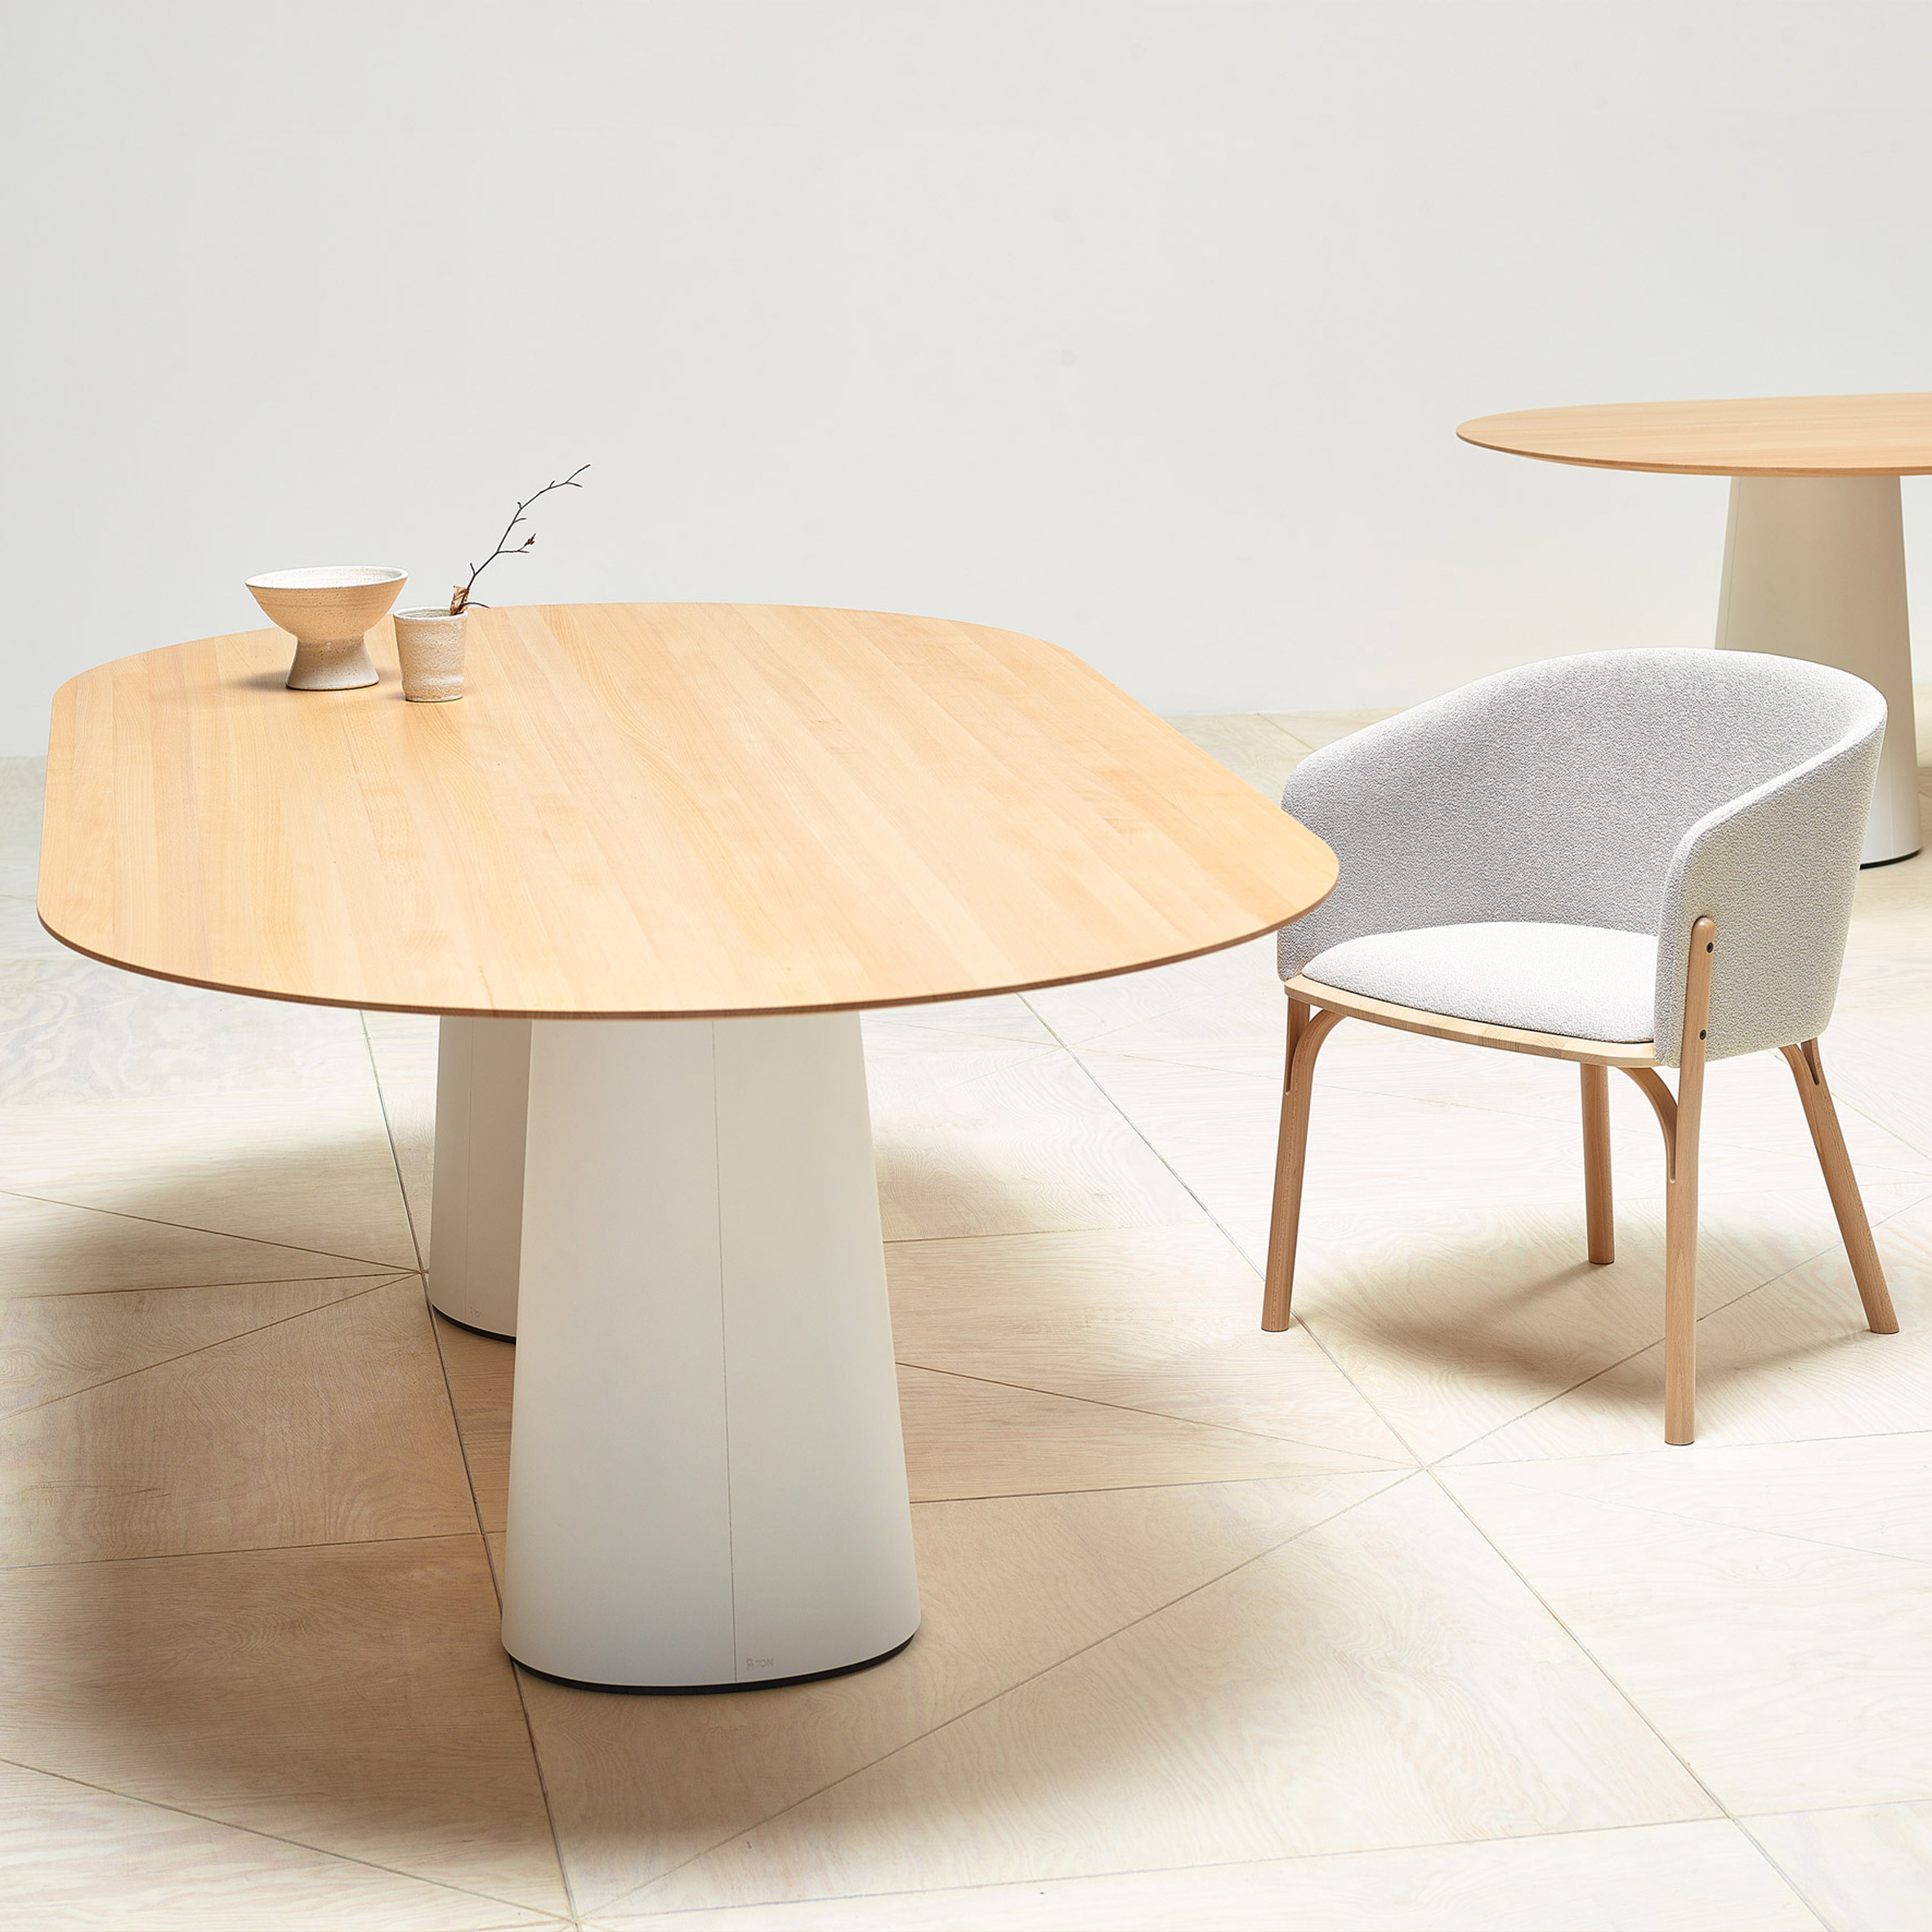 POV dining table with a white base